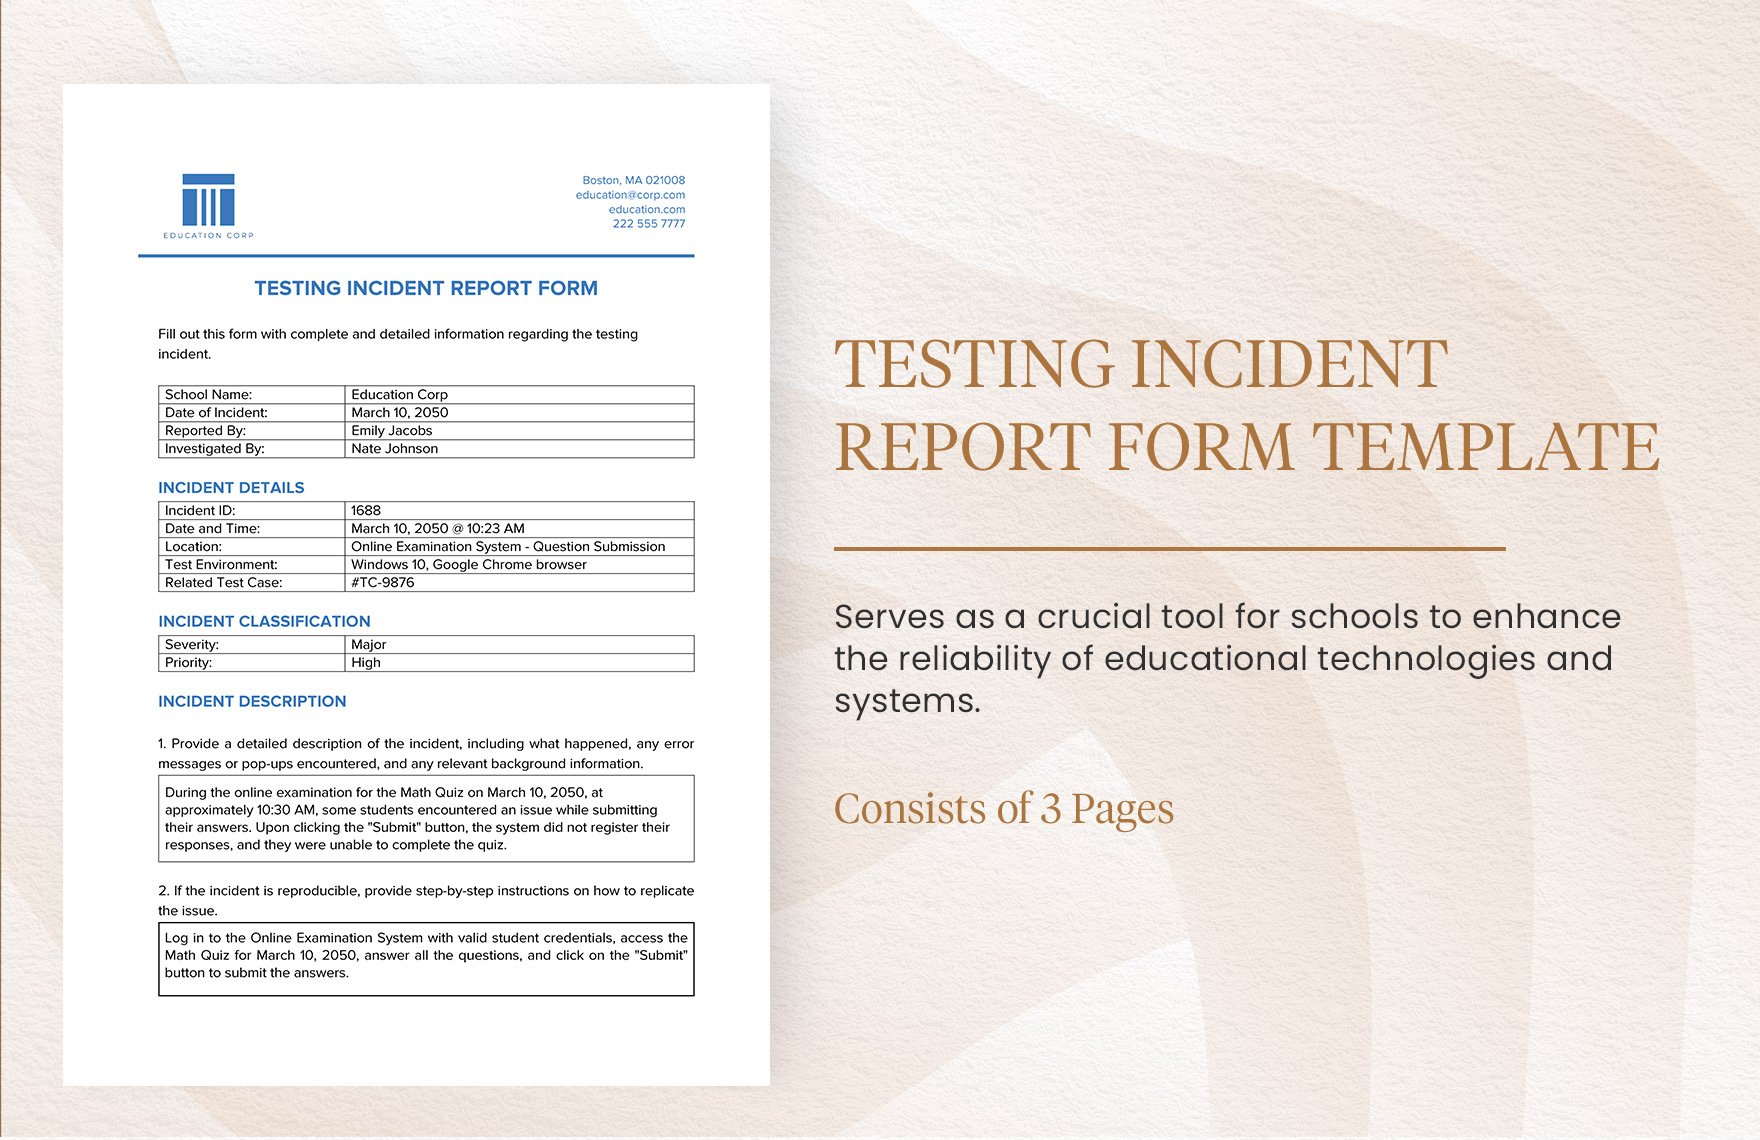 Testing Incident Report Form Template in Word, Google Docs, PDF